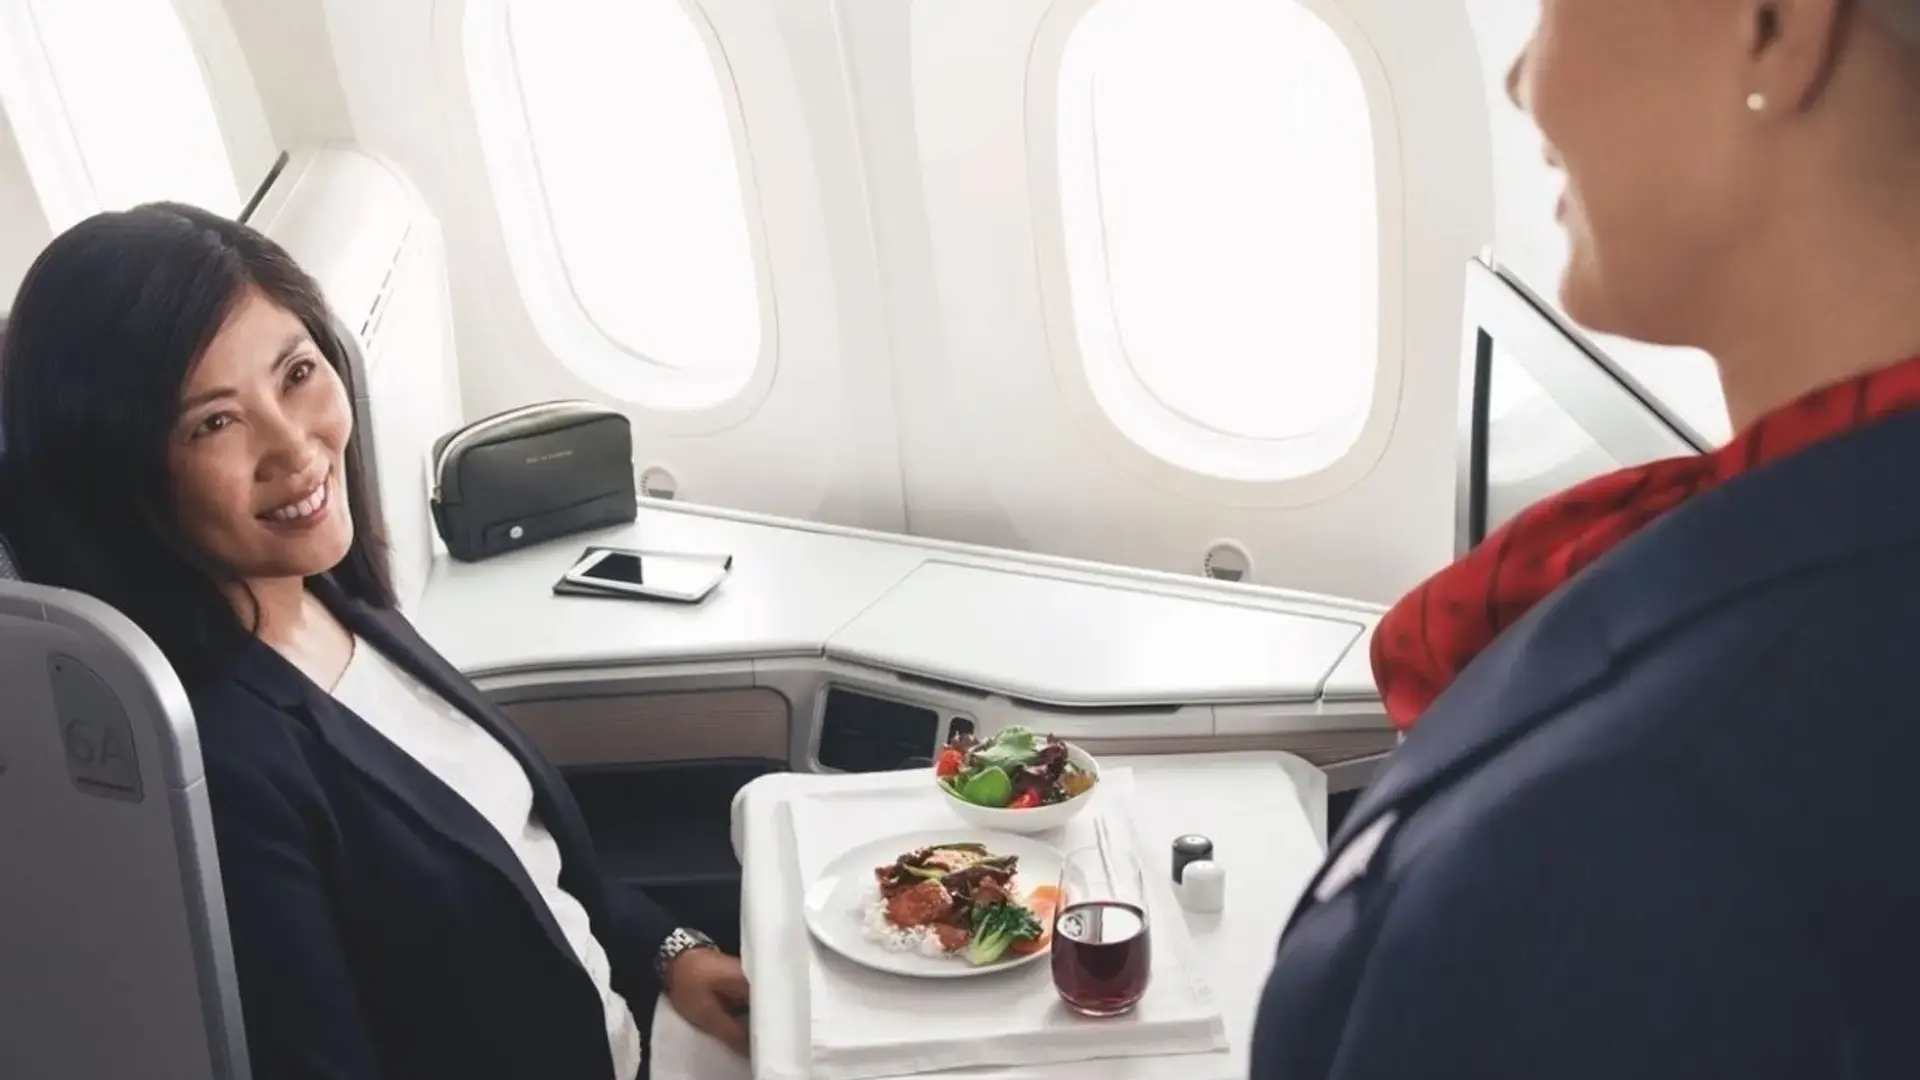 a woman getting her lunch served in the Air Canada business class cabin